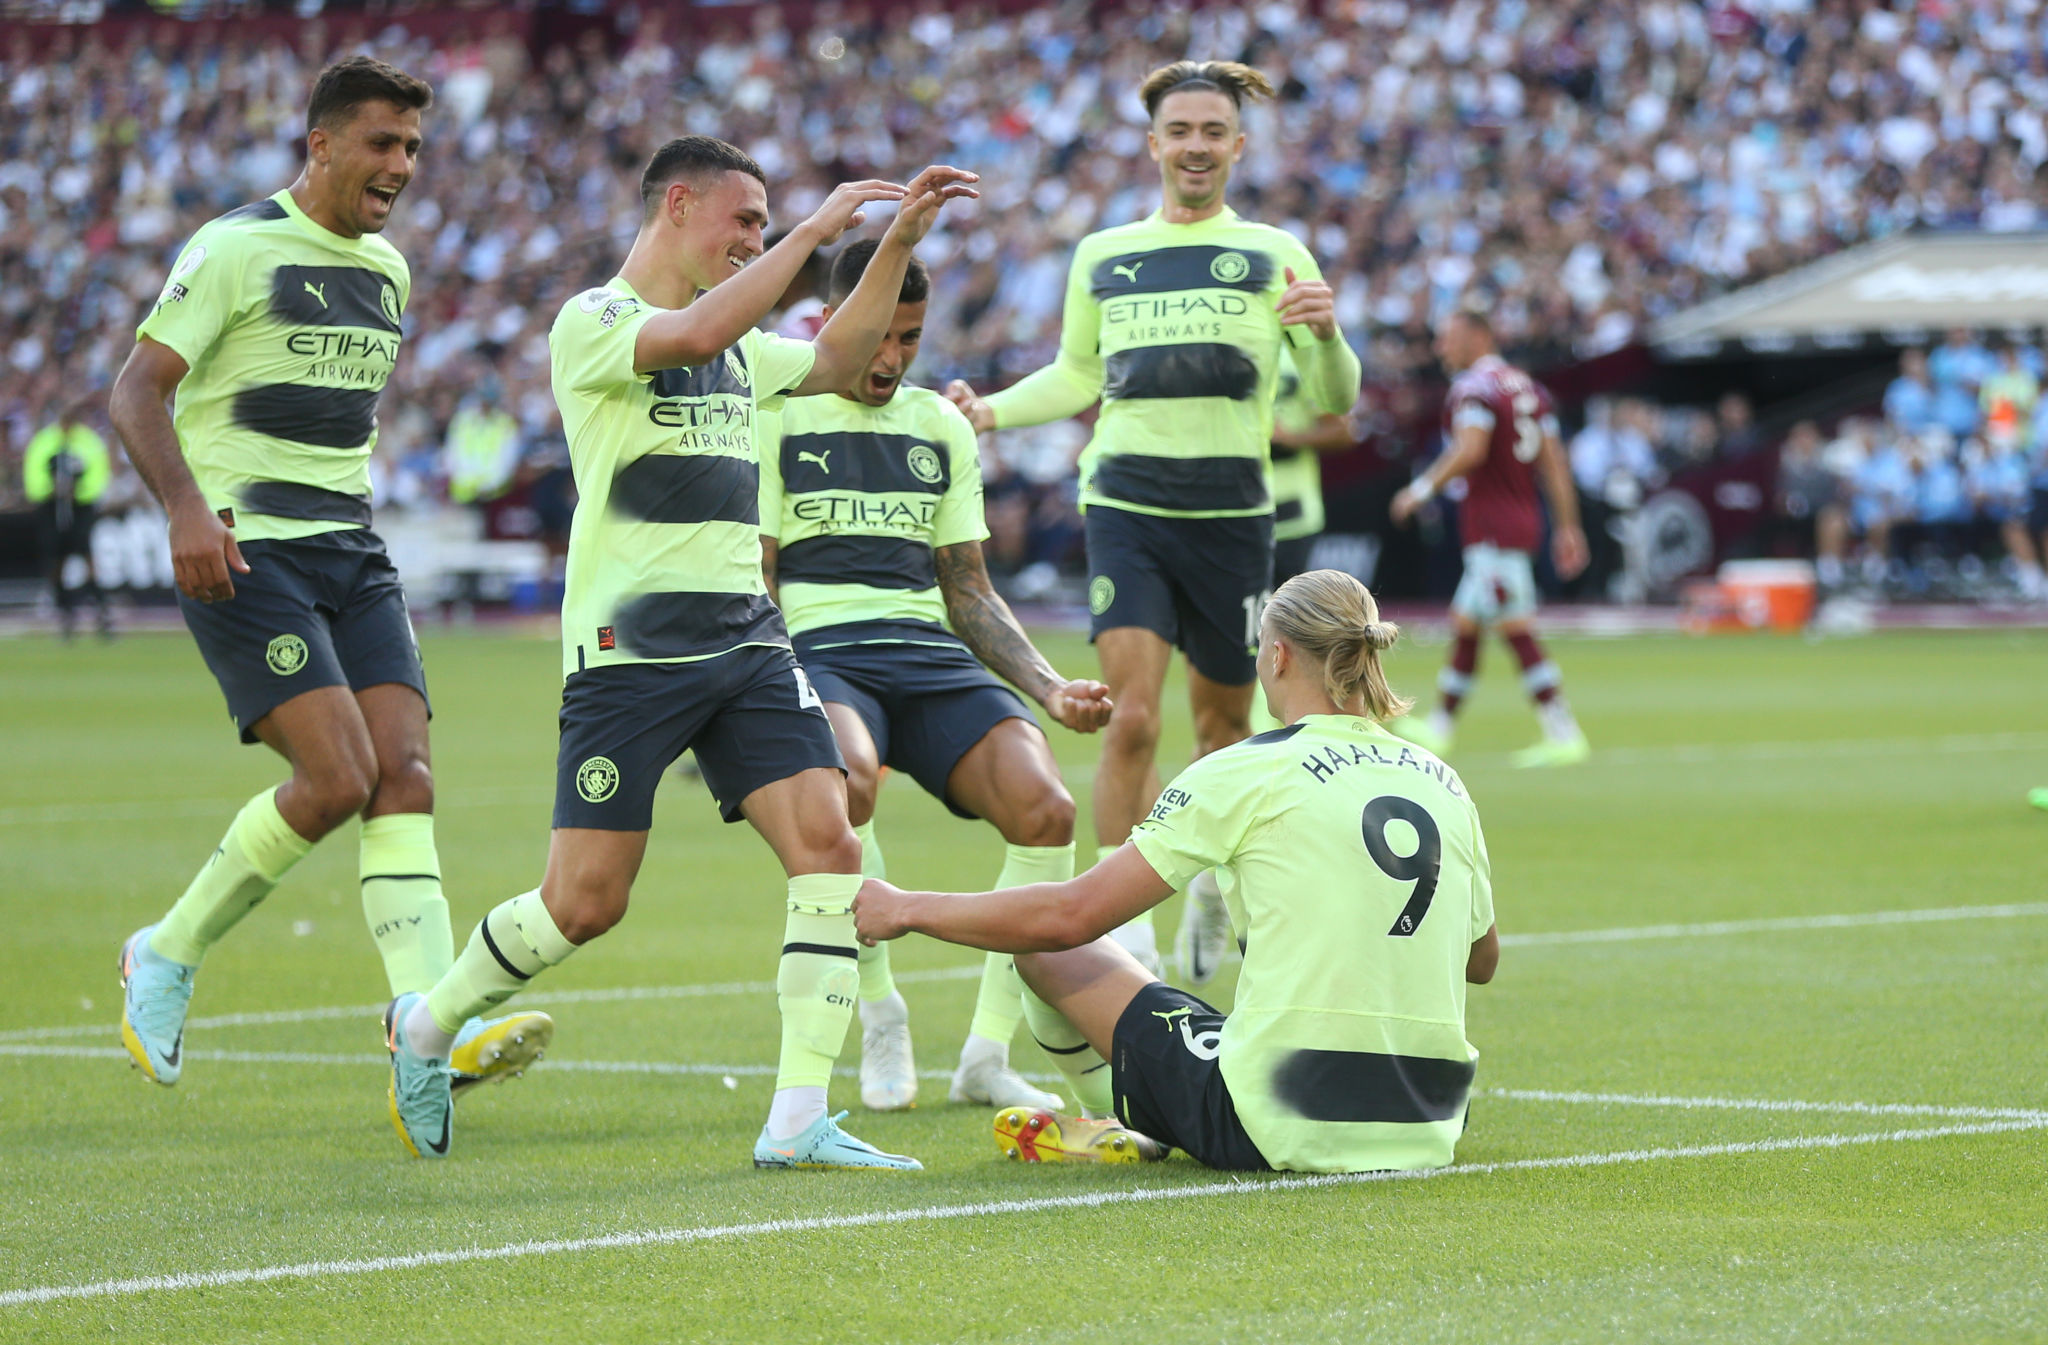 West Ham vs Manchester City LIVE: WHU 0-2 MCI, Erling Haaland shines on debut as Man City claim all three points against the Hammers, Check Manchester City beat West Ham United HIGHLIGHTS